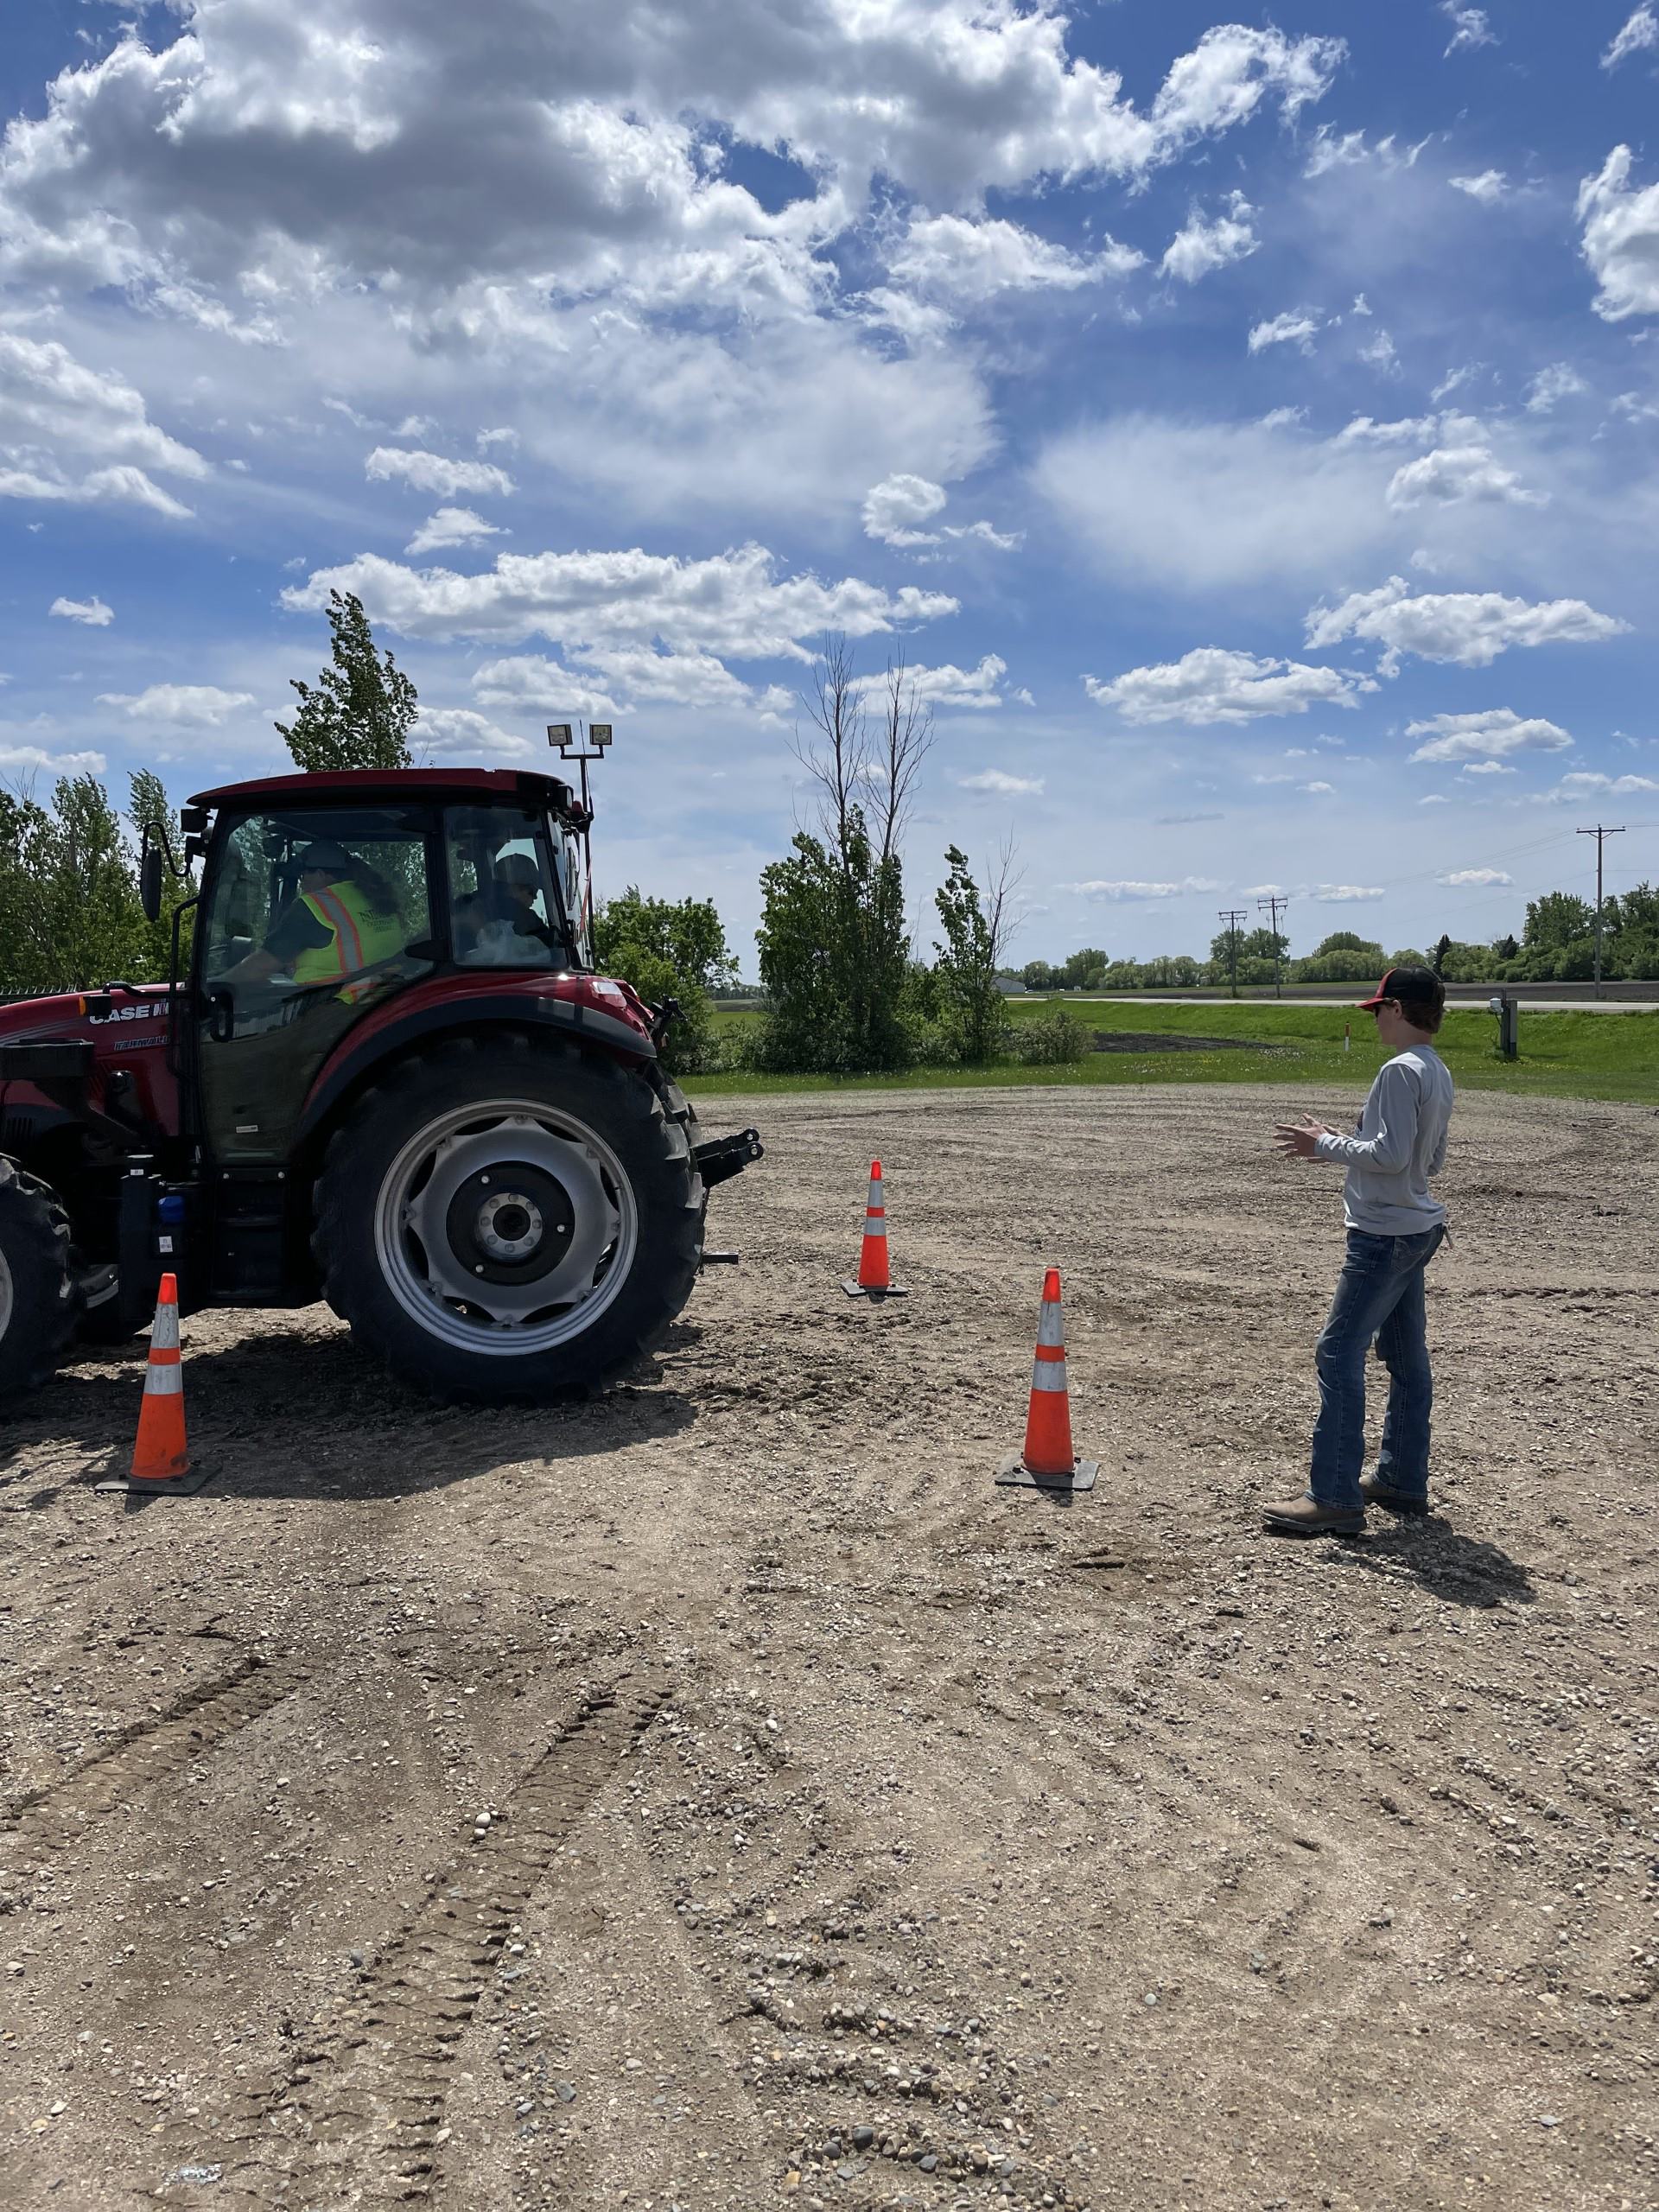 Youth will learn the basics of safe tractor and machinery operation at the NDSU Extension Youth Farm Safety Camps. (NDSU photo)